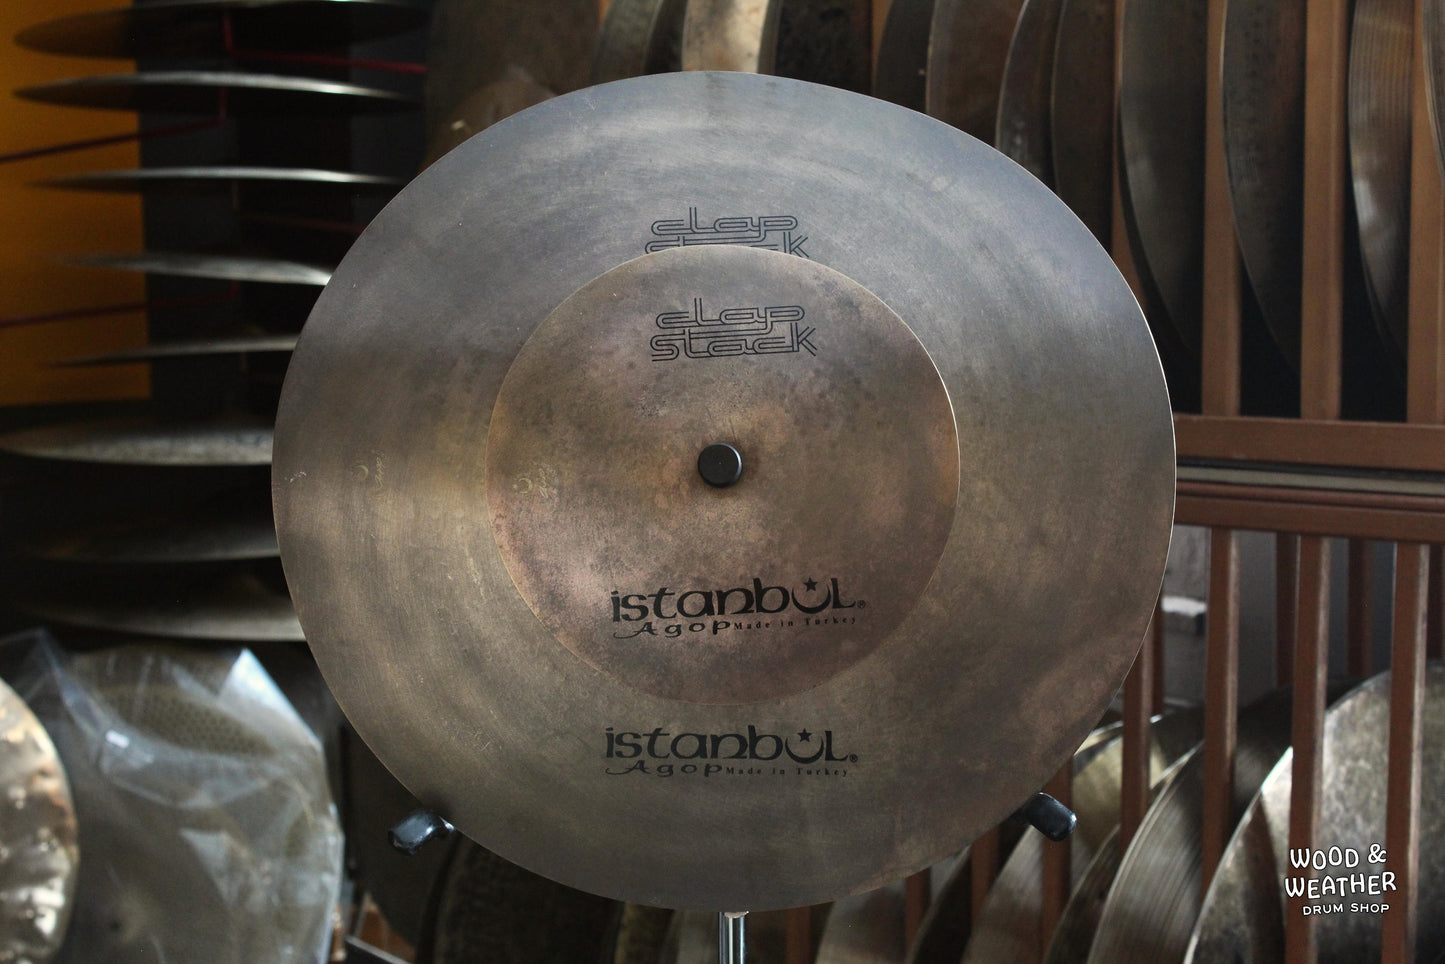 Istanbul Agop Clap Stack 9/17" Cymbal Expansion Set